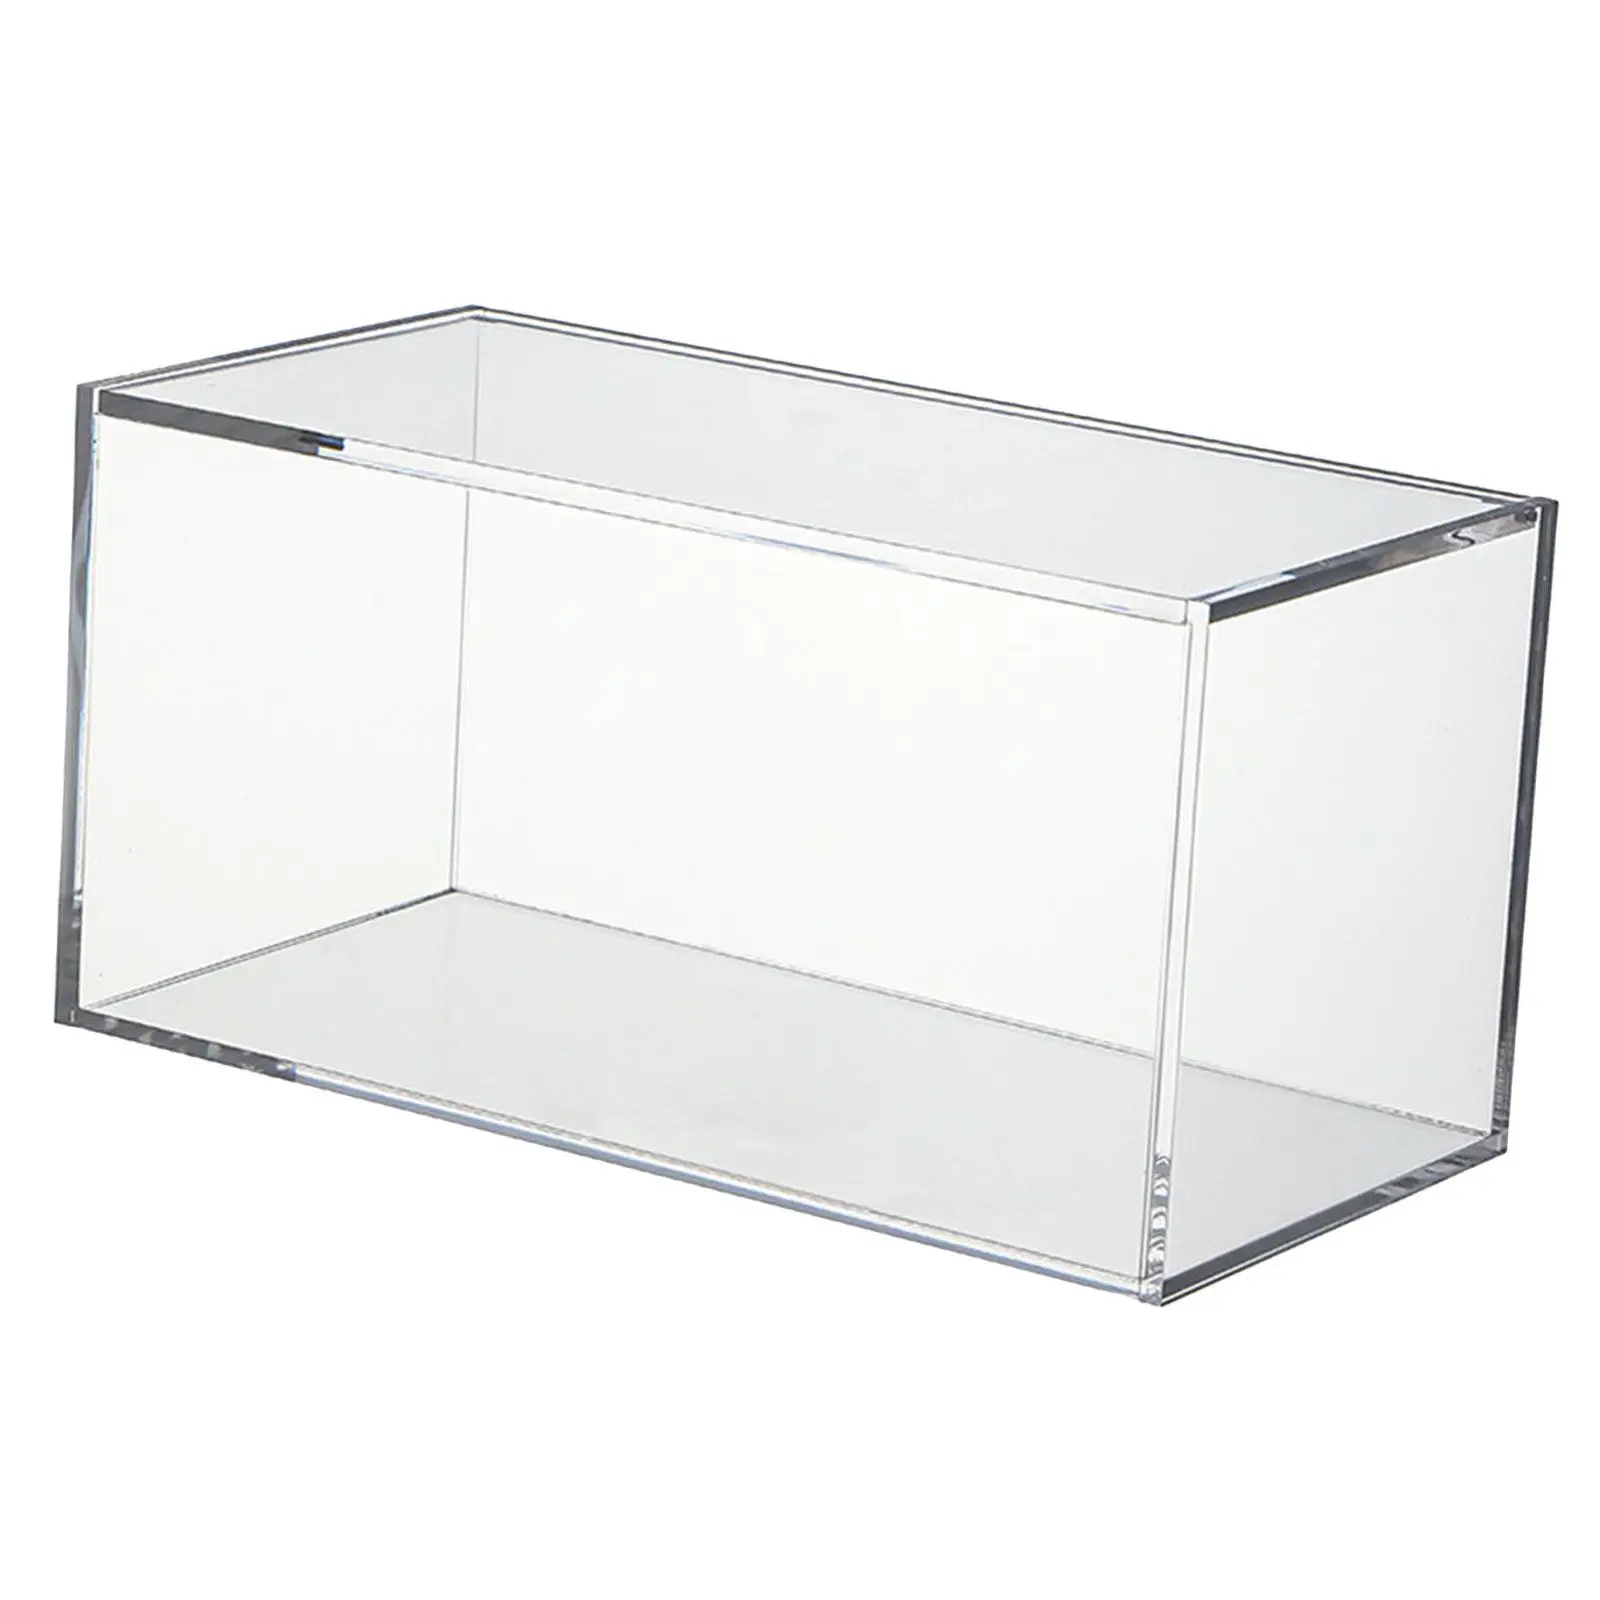 Acrylic Box with Lid Transparent Home Crafts Coffee Bar Accessories Kitchen Dustproof Protection Cabinet Organizer Display Case